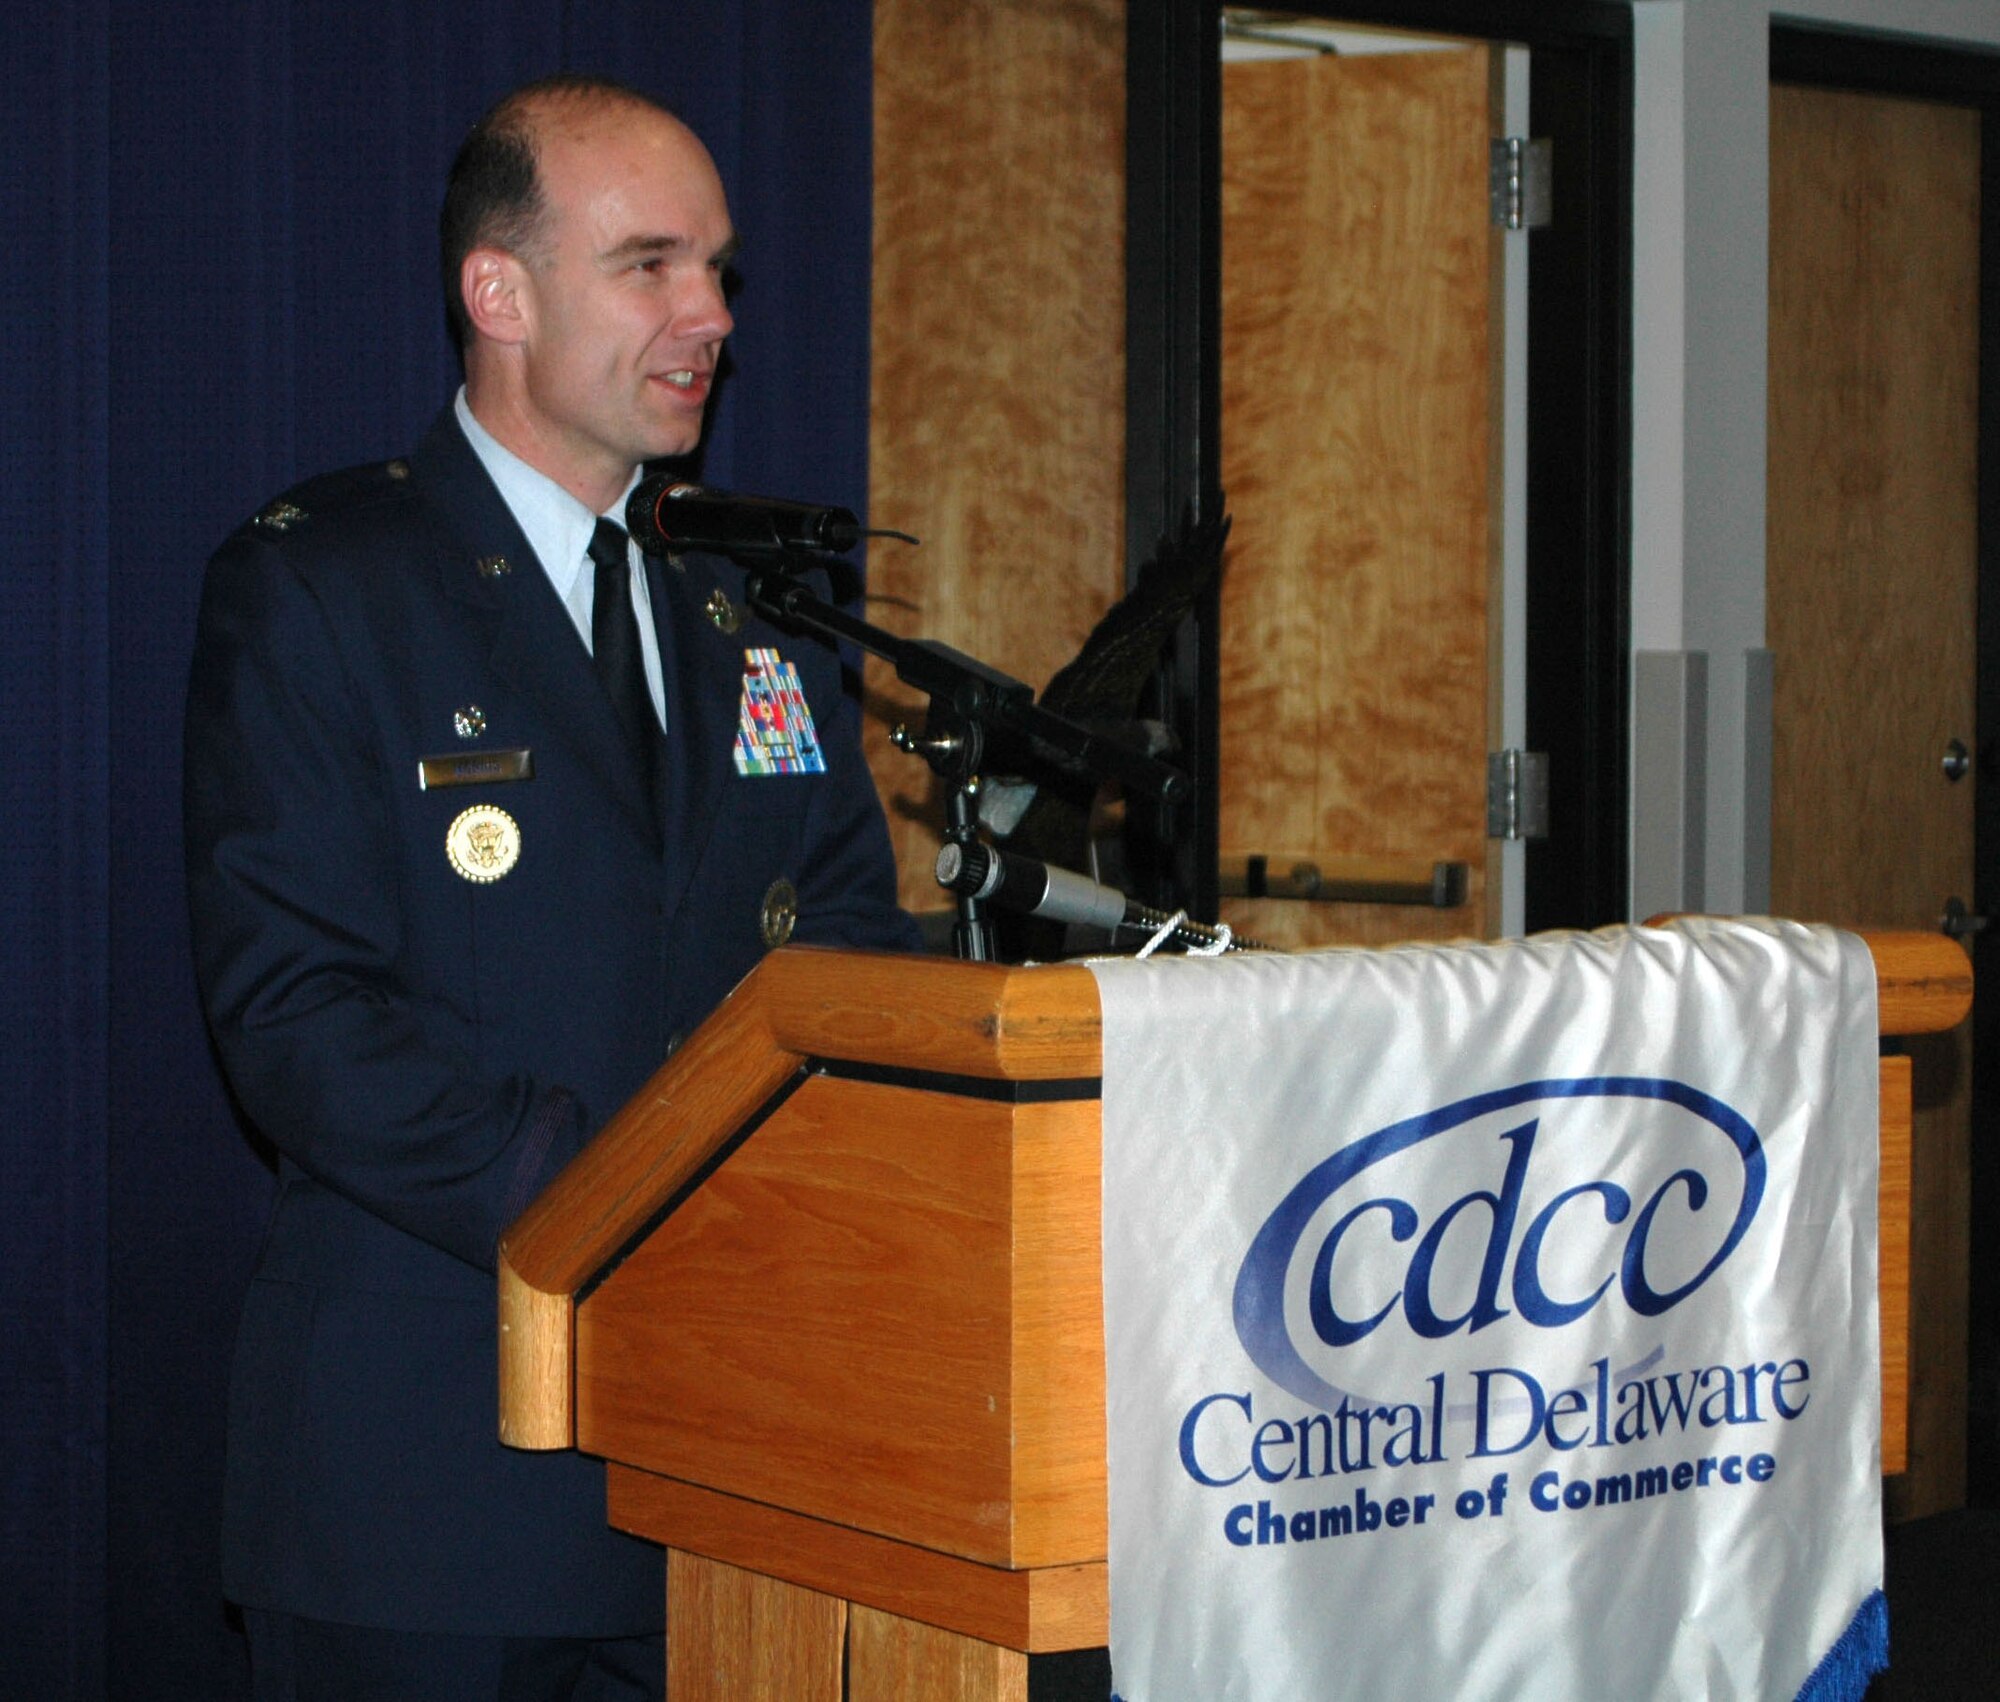 436th Airlift Wing Commander Col. Manson O. Morris addresses base and community leaders at the Military Affaire at The Landings here Nov. 4. This annual event is hosted by the Central Delaware Chamber of Commerce and the Air Force Association's Galaxy Chapter. (U.S. Air Force photo/Capt. Marnee A.C. Losurdo)
